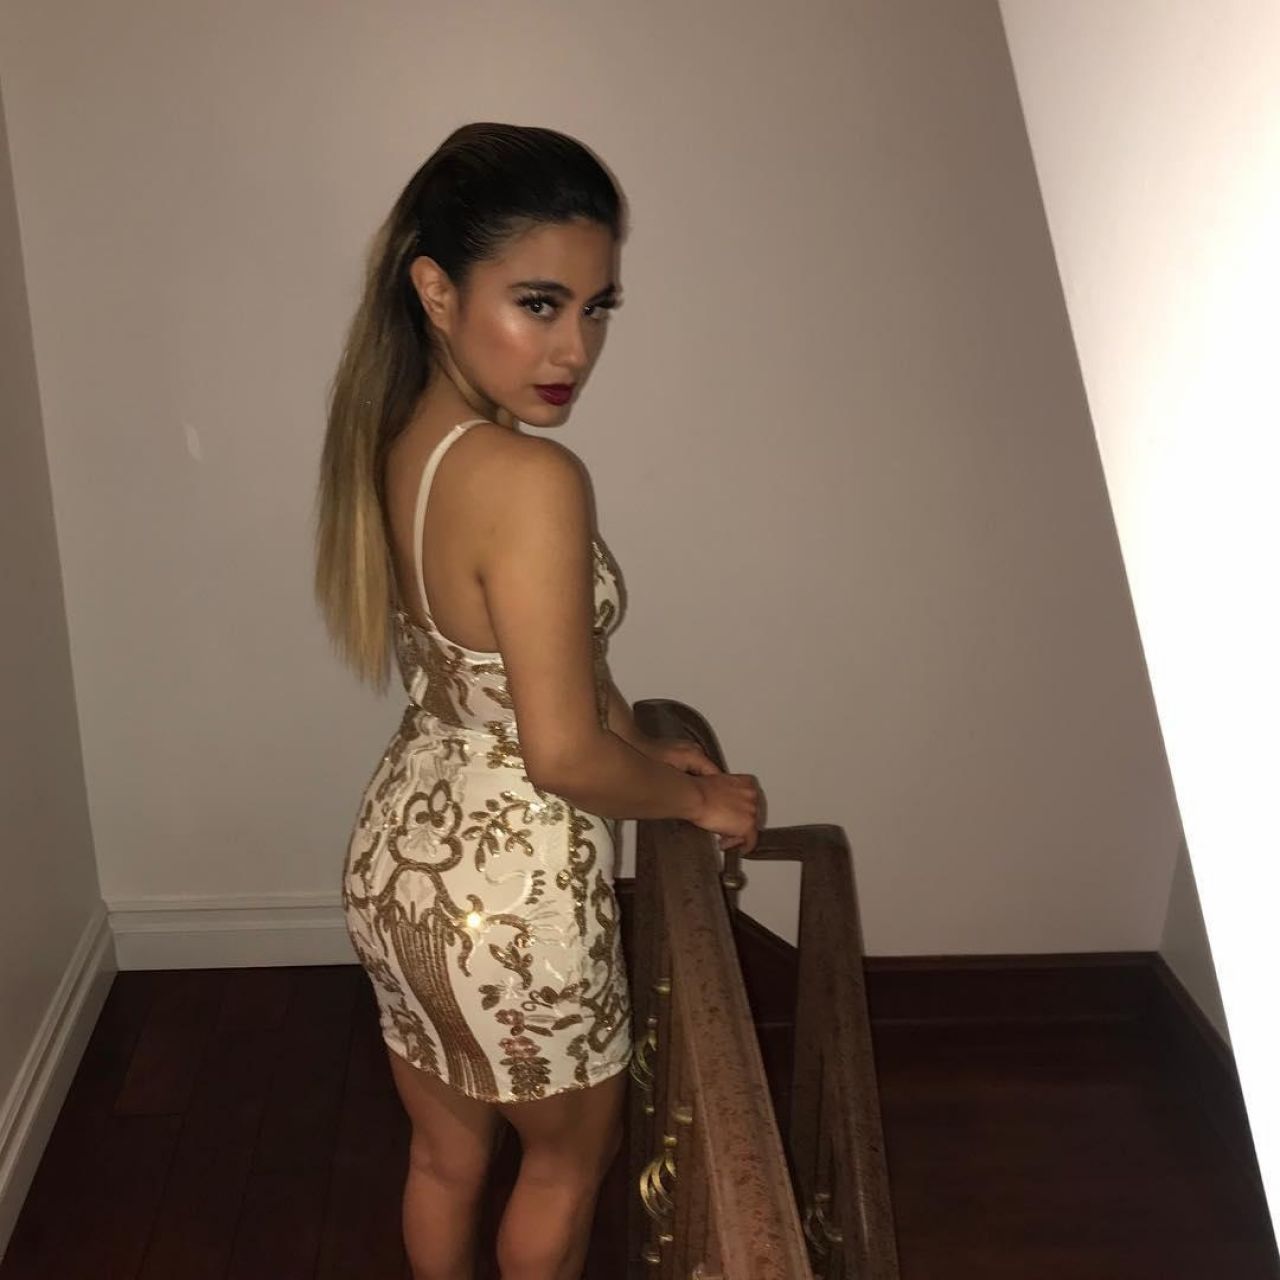 The dress at the transparency of Ally Brooke on the account instagram @ally...